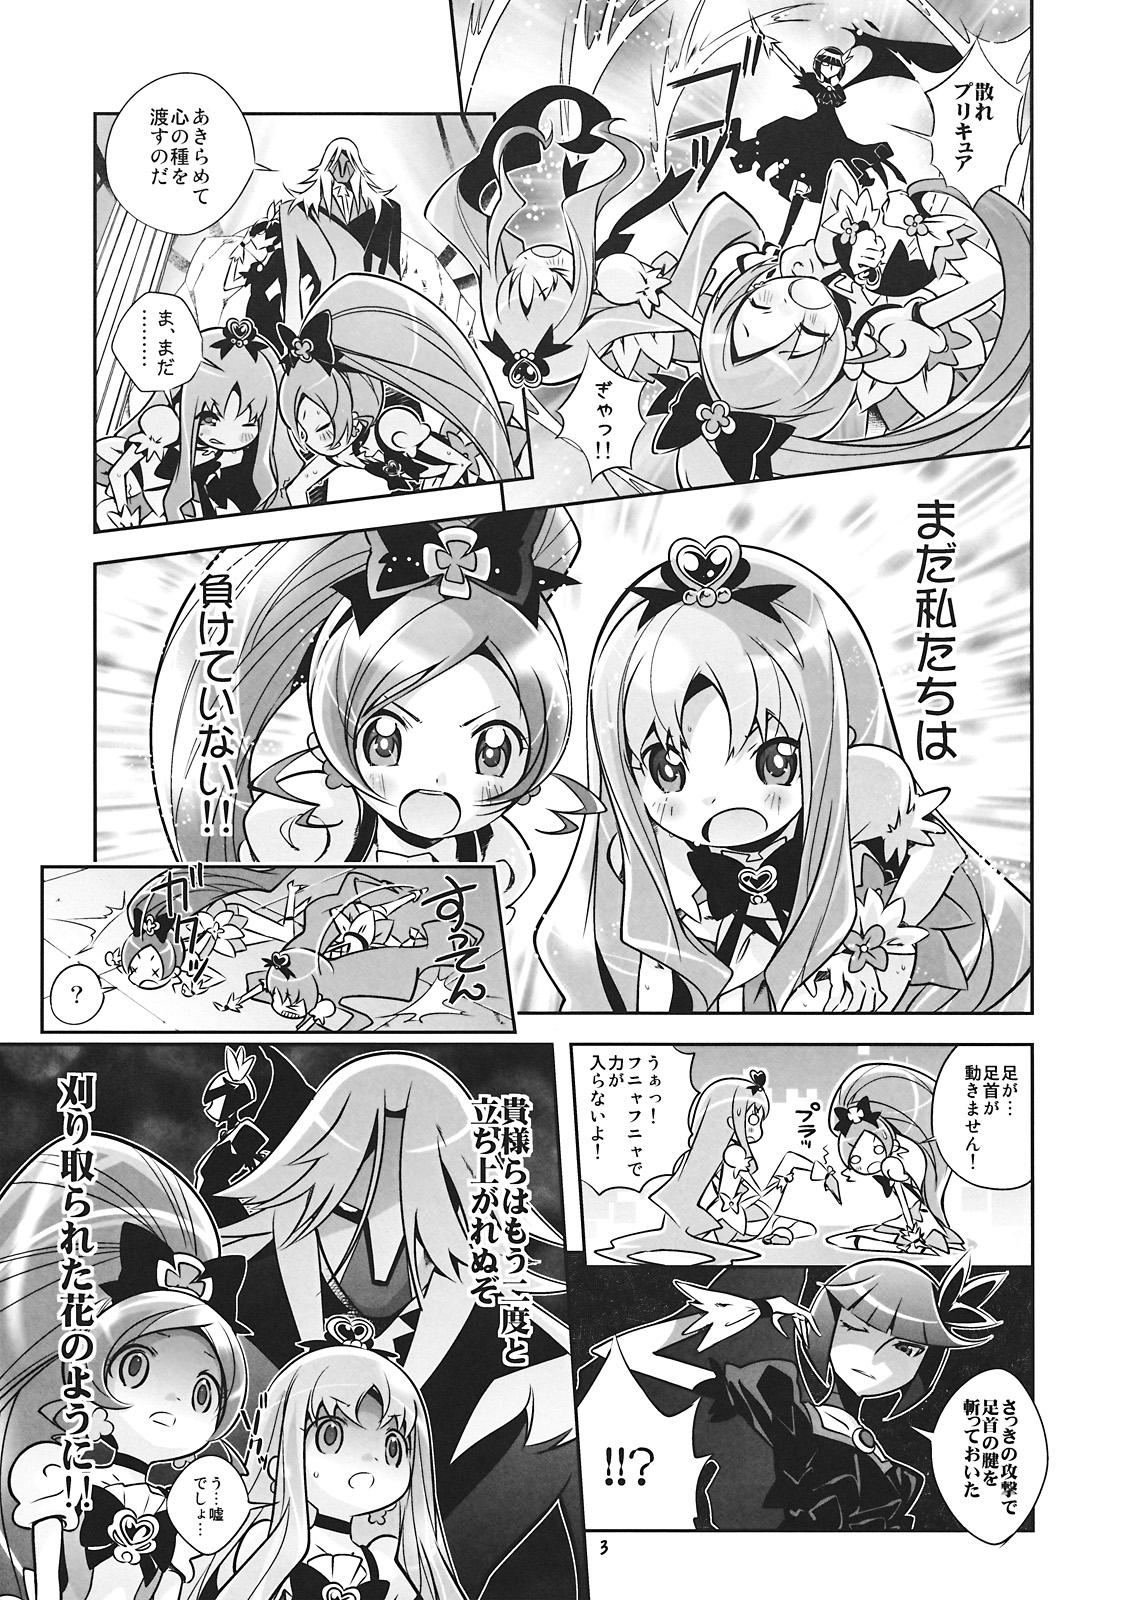 Latin Reaped flower - Heartcatch precure Ass Worship - Page 3